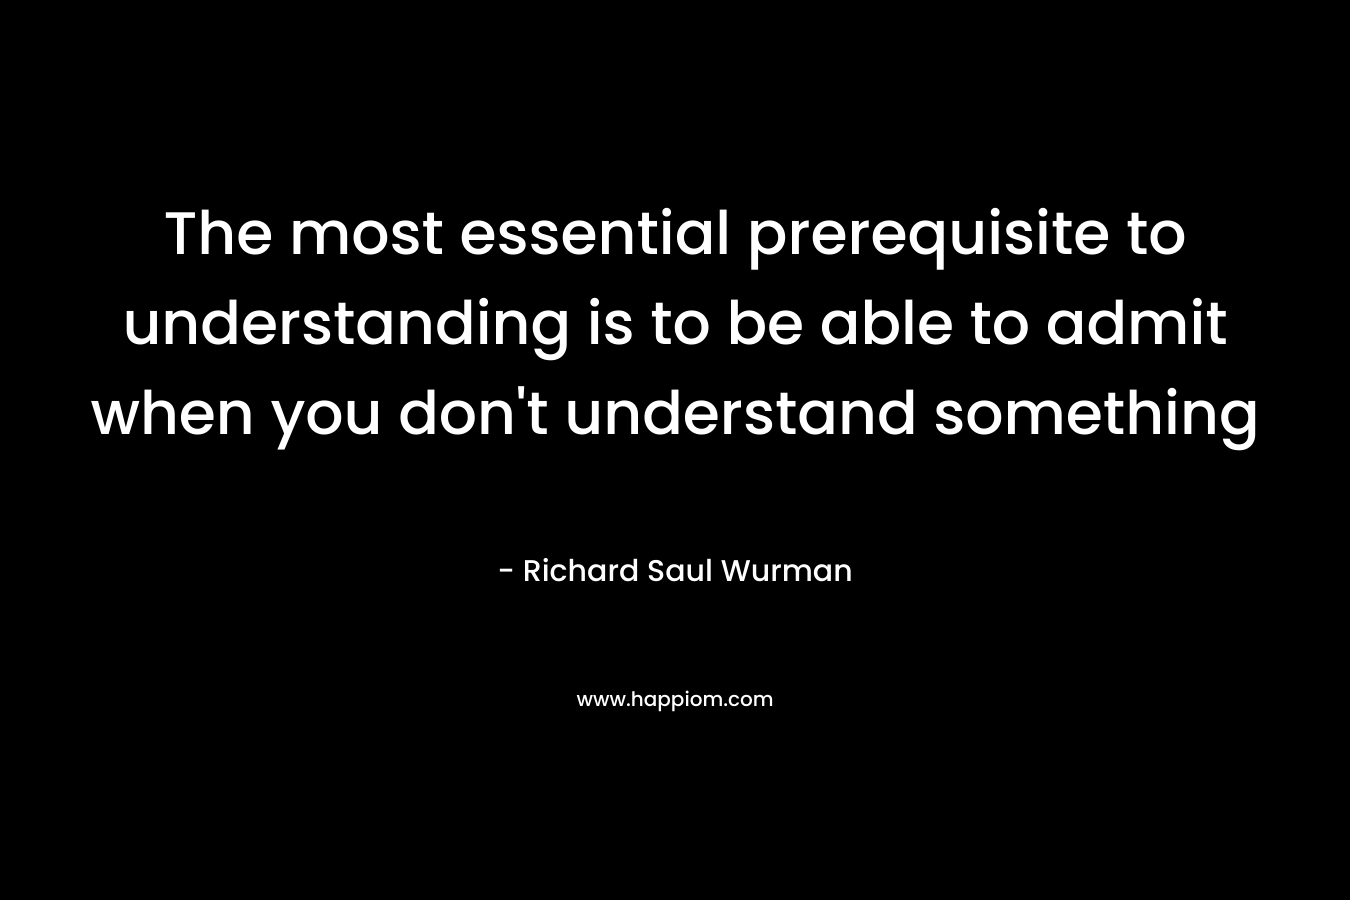 The most essential prerequisite to understanding is to be able to admit when you don’t understand something – Richard Saul Wurman